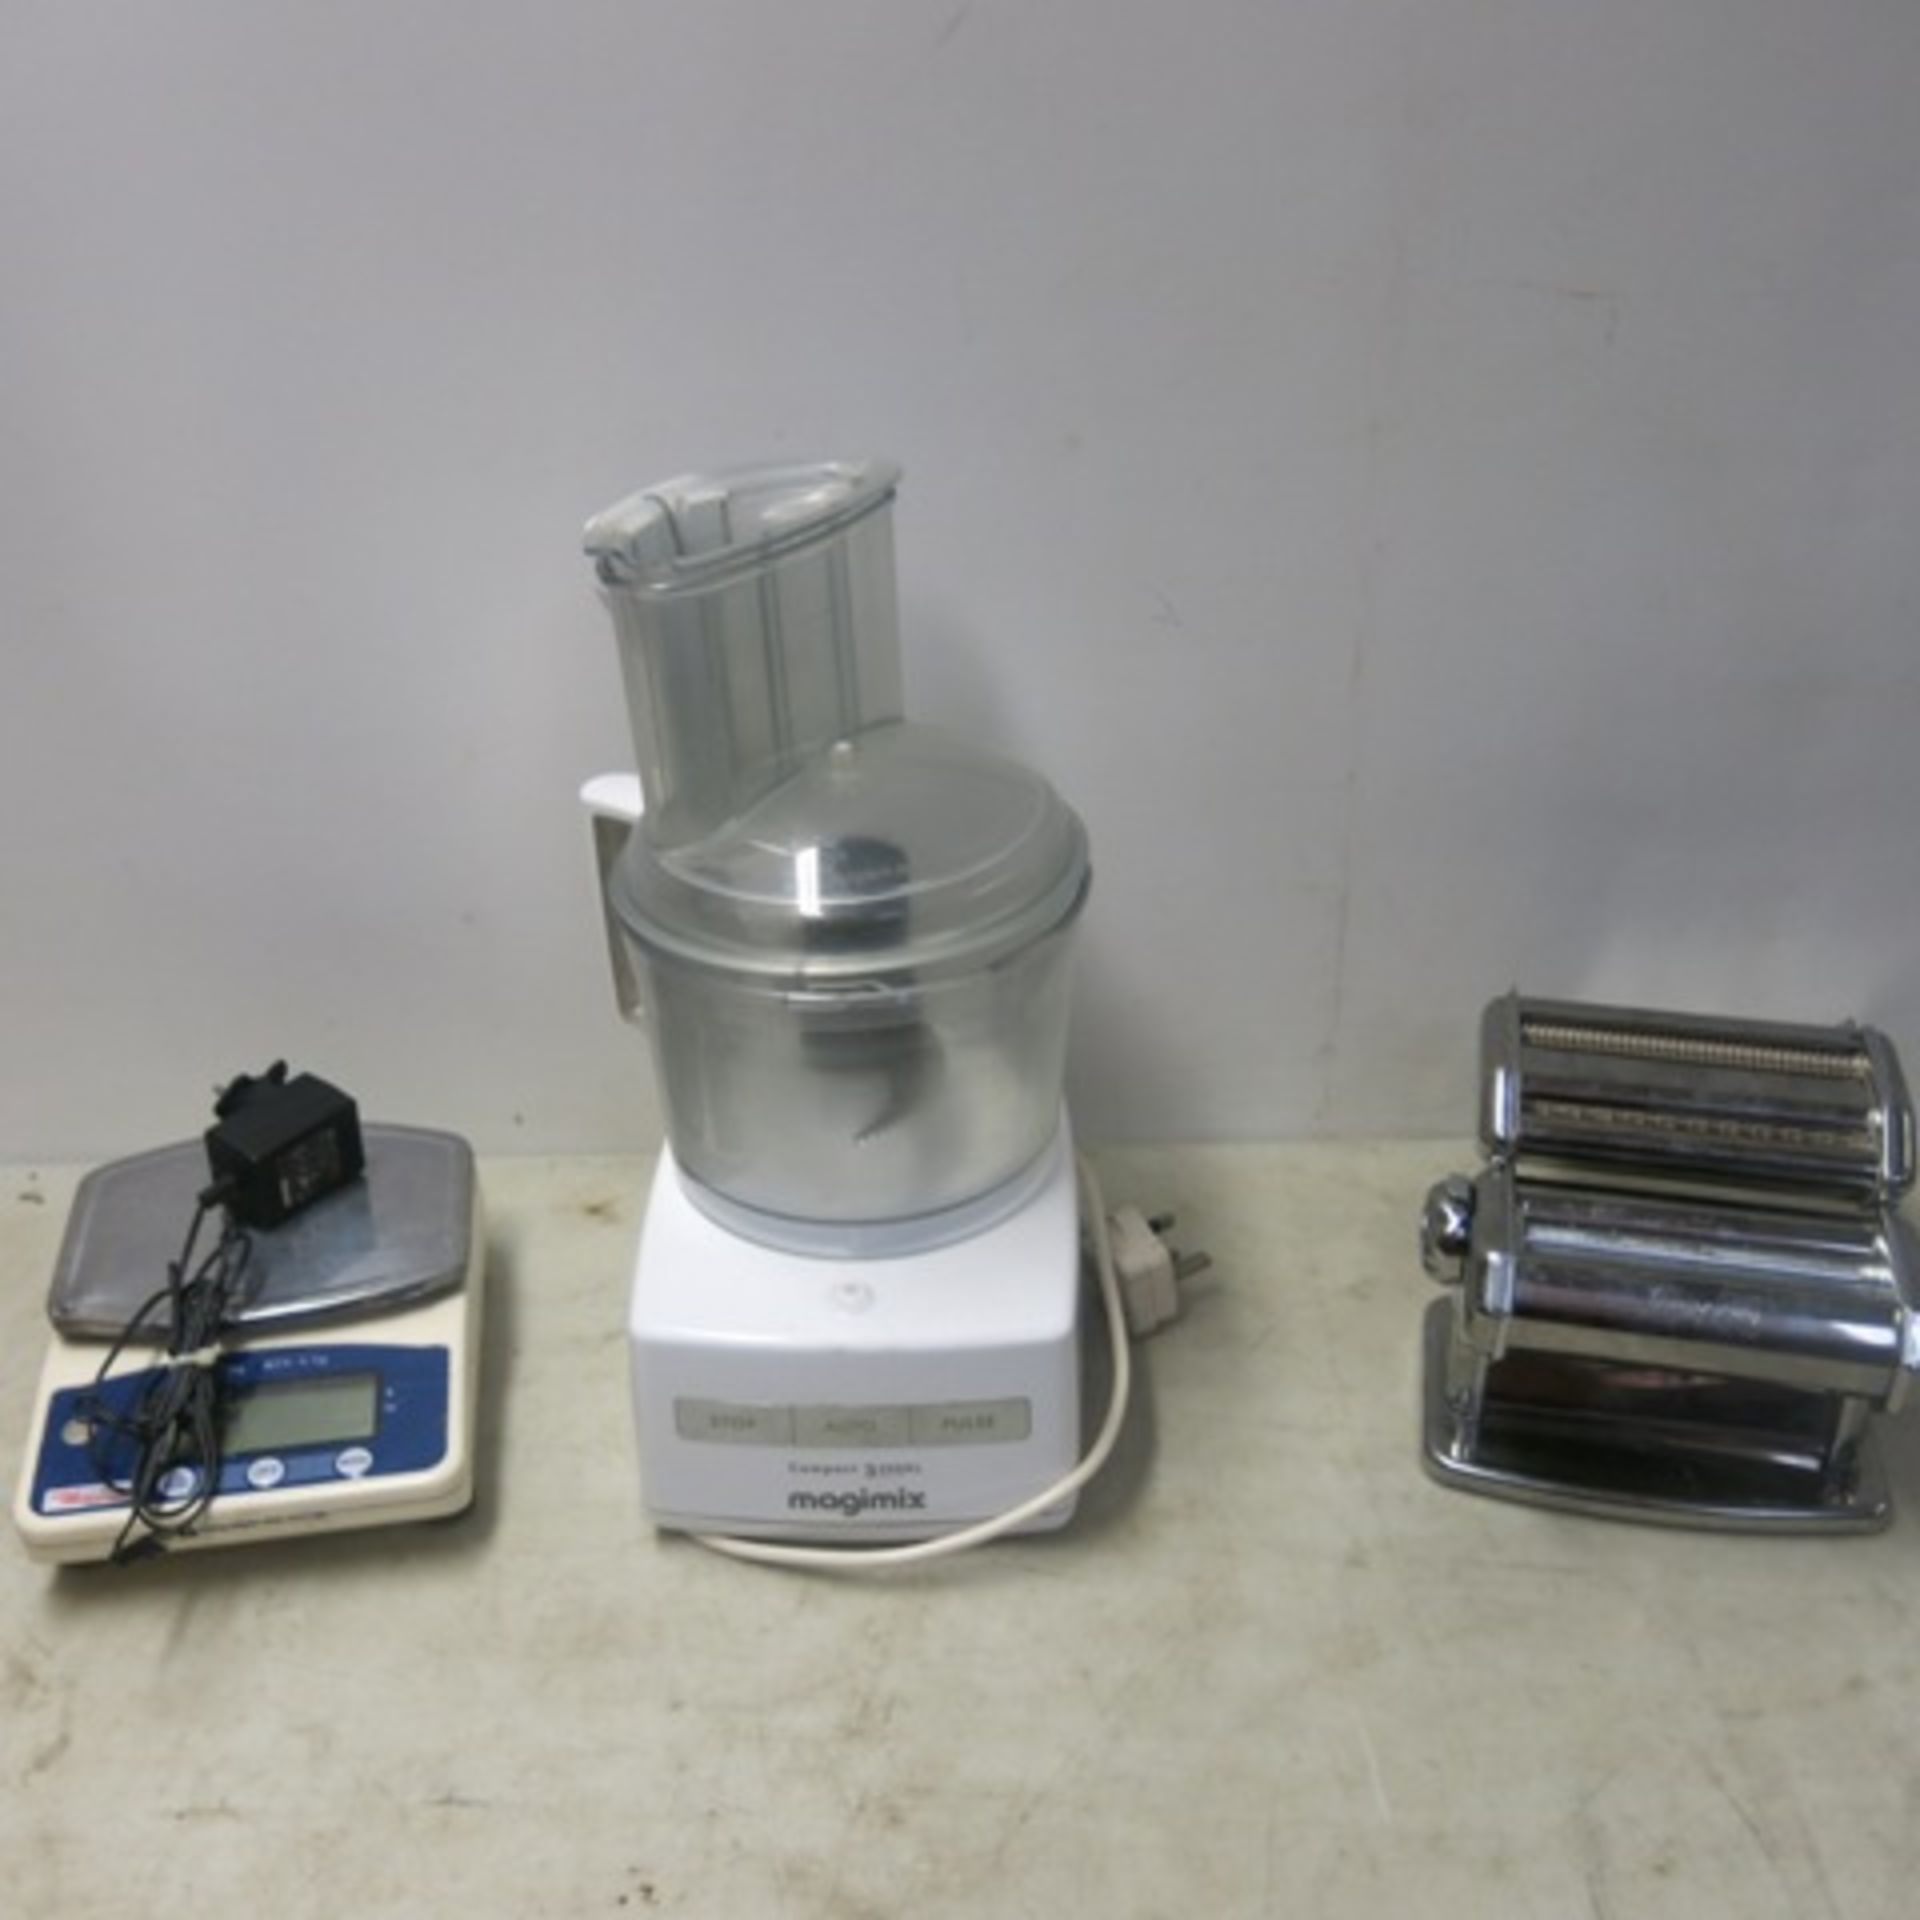 Lot of Kitchen Equipment to Include: 1 x Magimix Compact 300xl Food Processor, 1 x Imperia Pasta